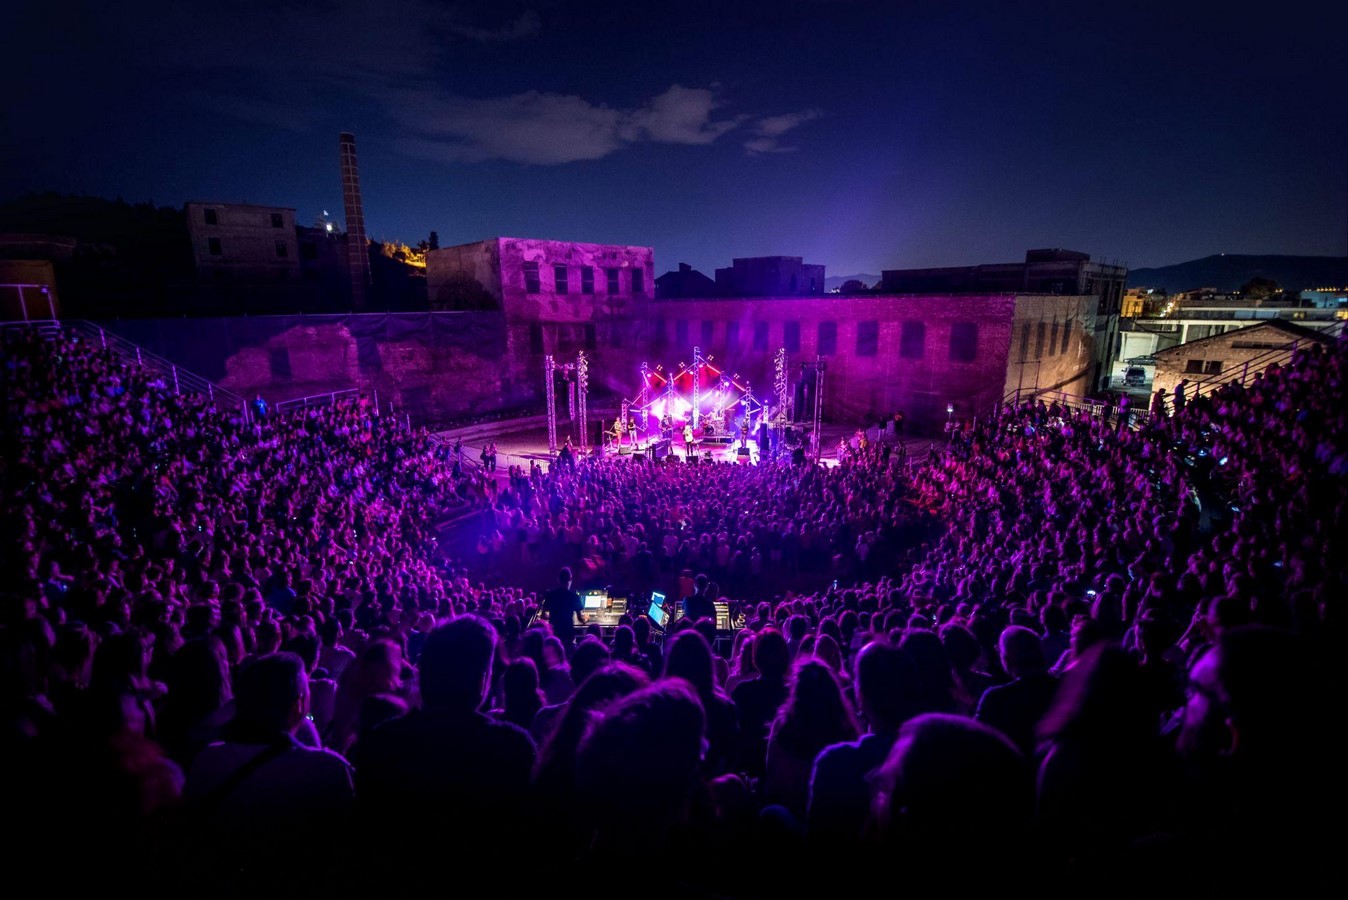 Old olive mill converted to a theater for Aeschylia Festival_ ©Keep Walking Greece Website